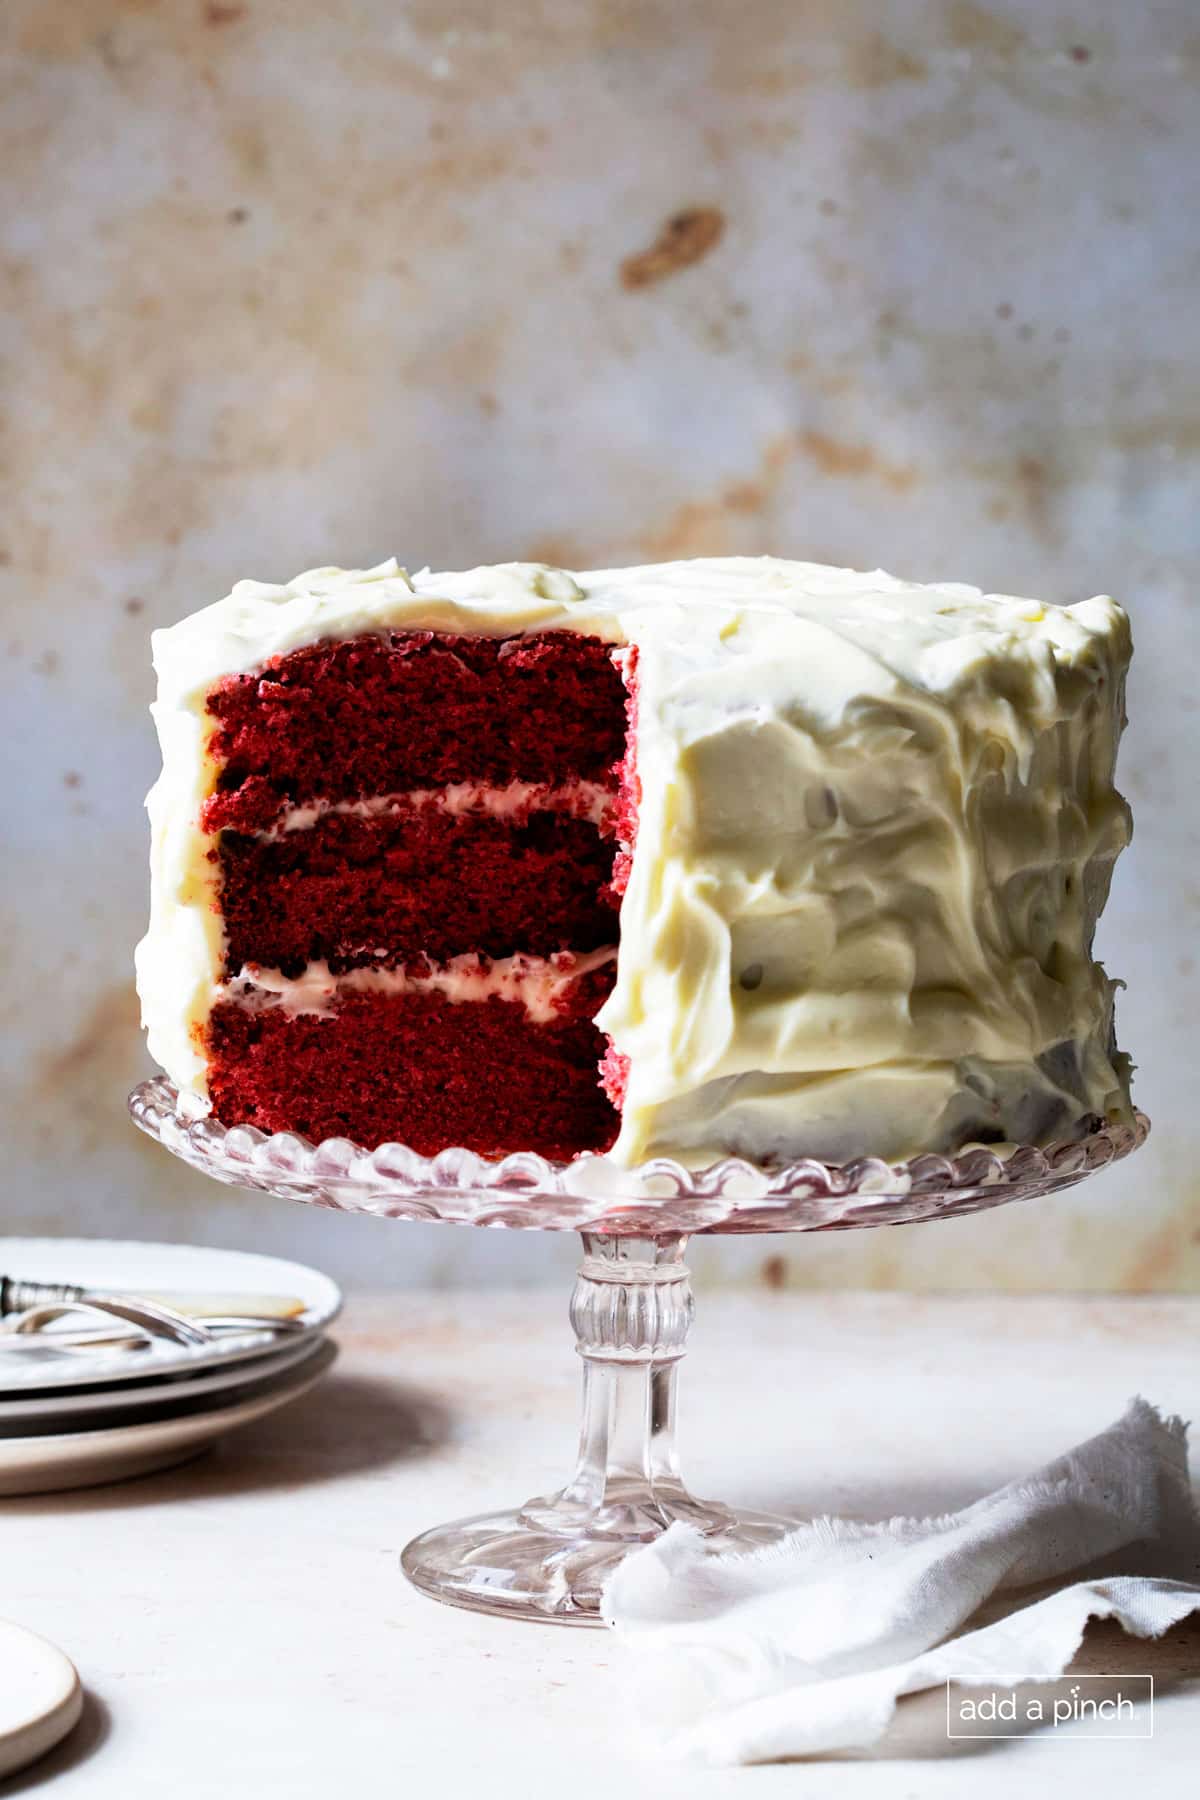 Photograph of red velvet cake with white frosting with a slice cut so that you can see the three layers of the rich, velvety cake.